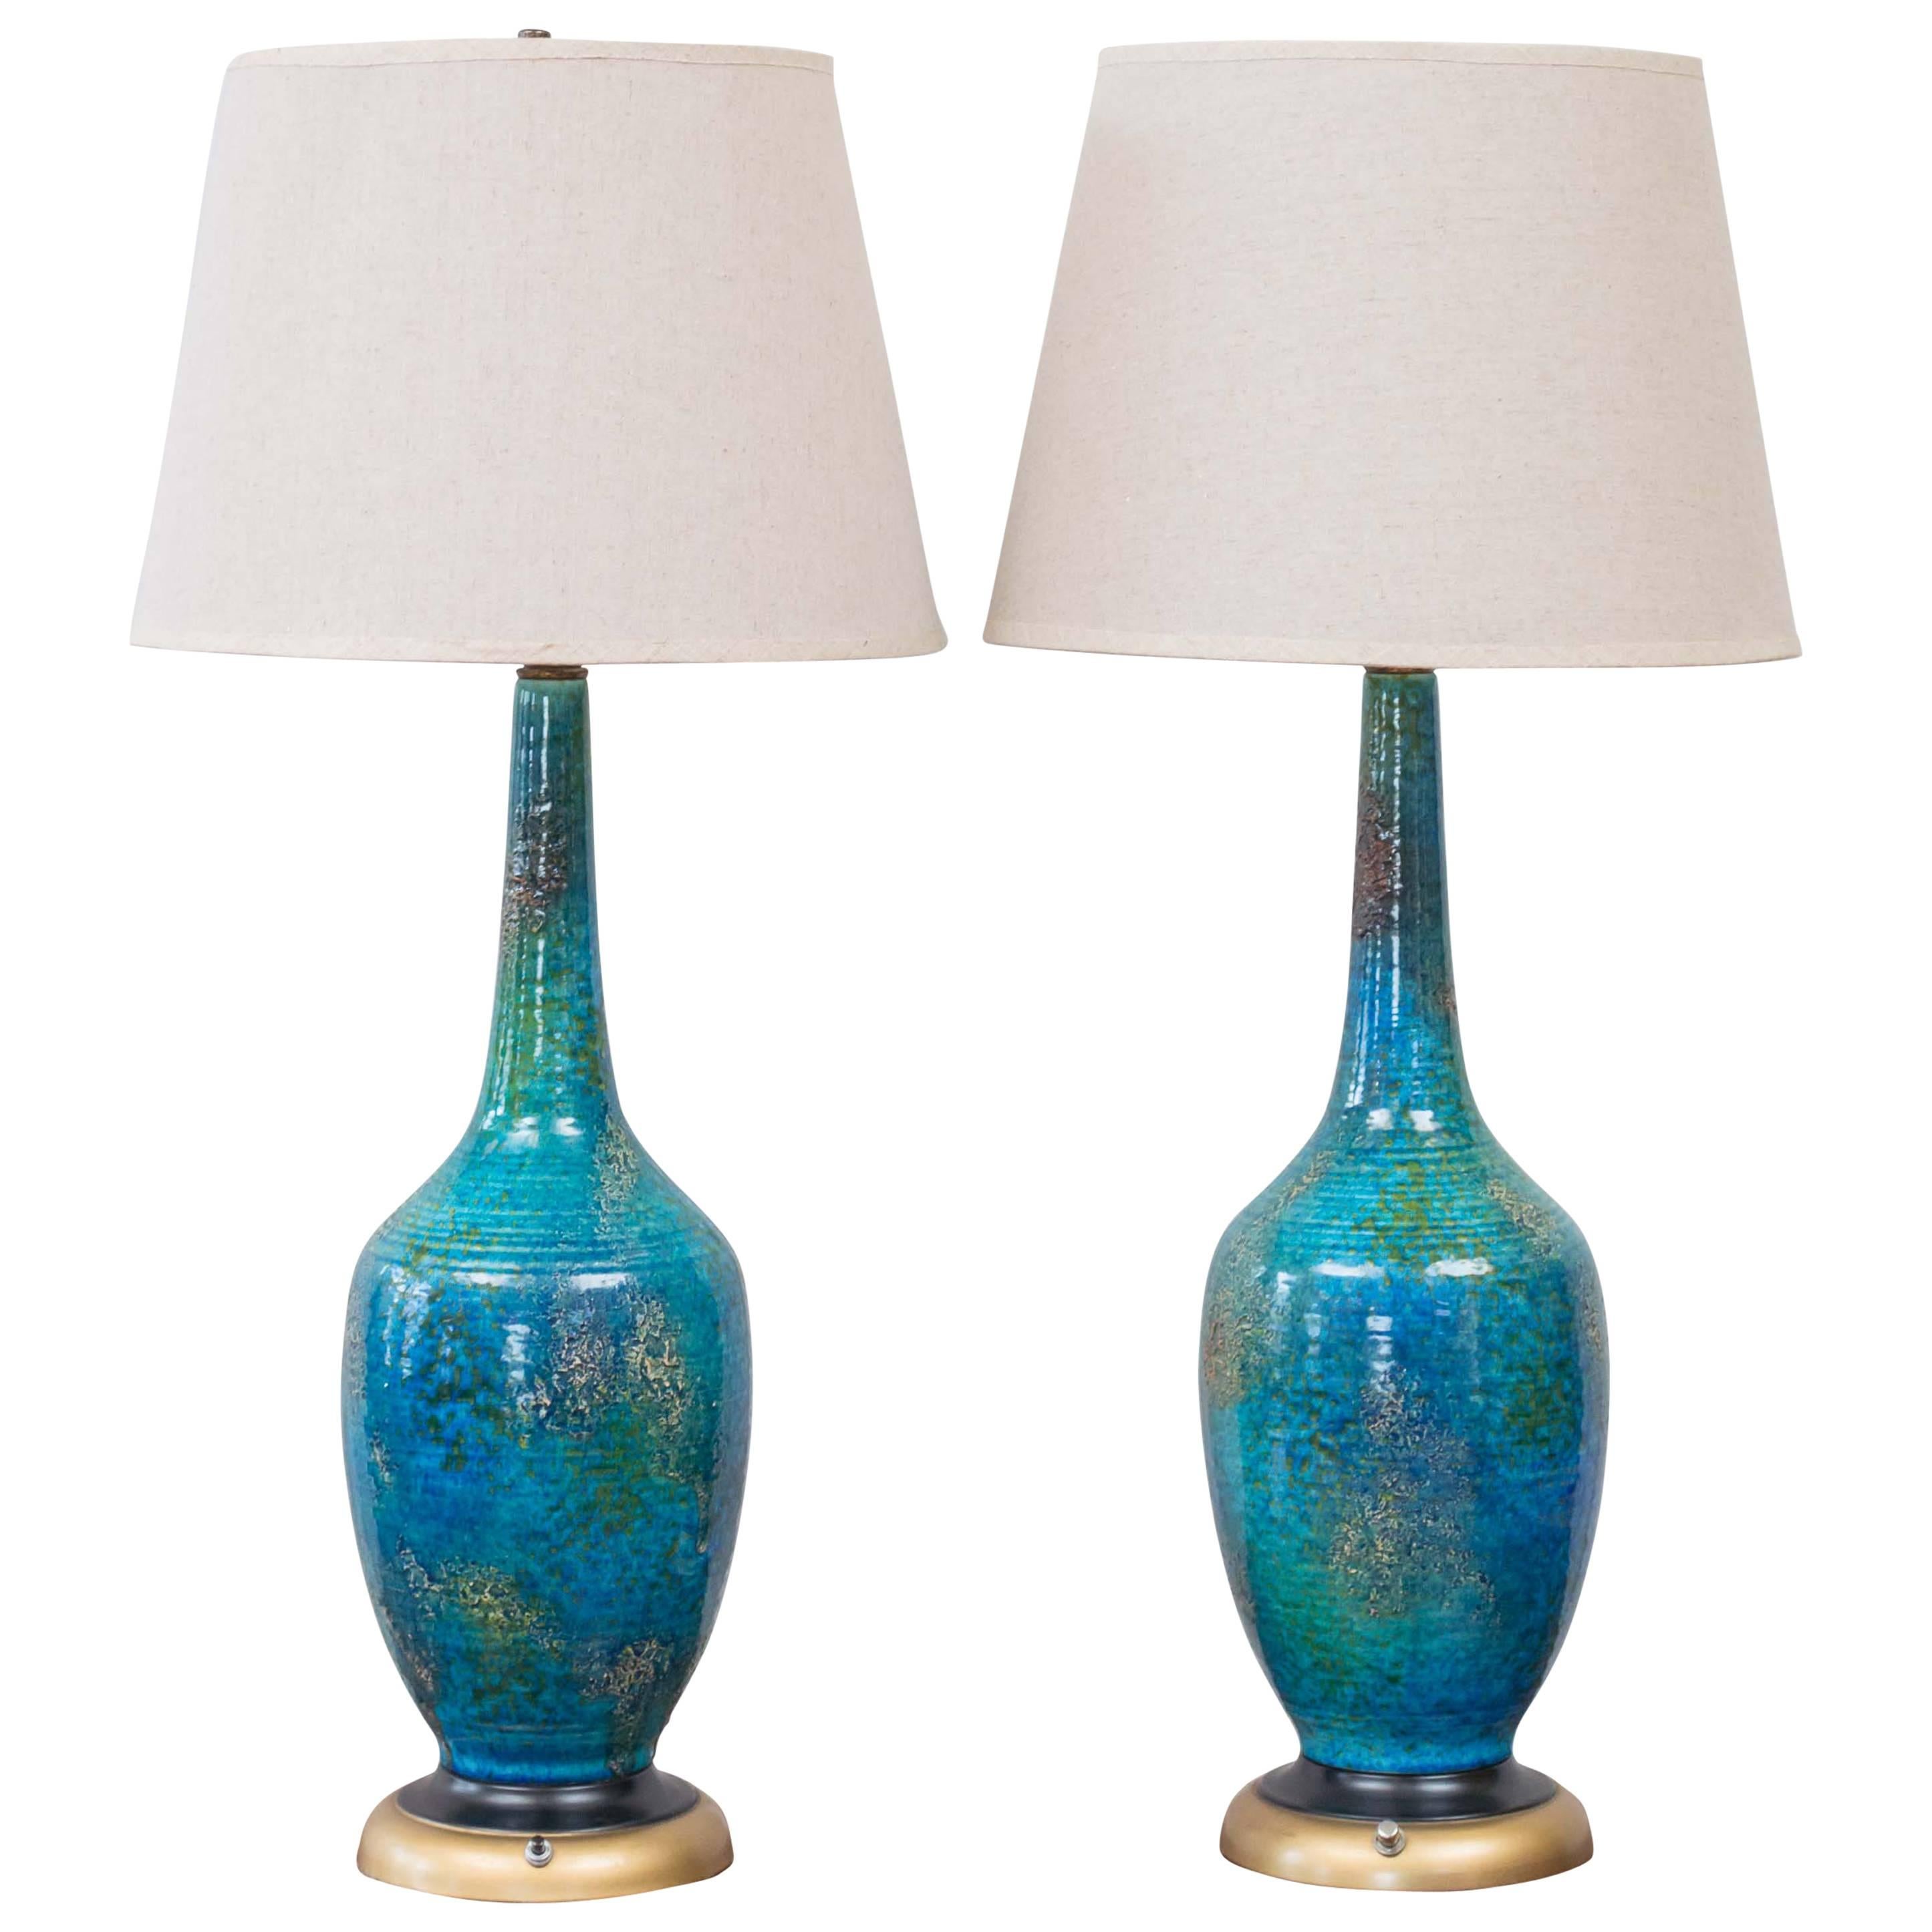 Pair of Rimini Blue Ceramic Table Lamps by Bitossi for Raymor